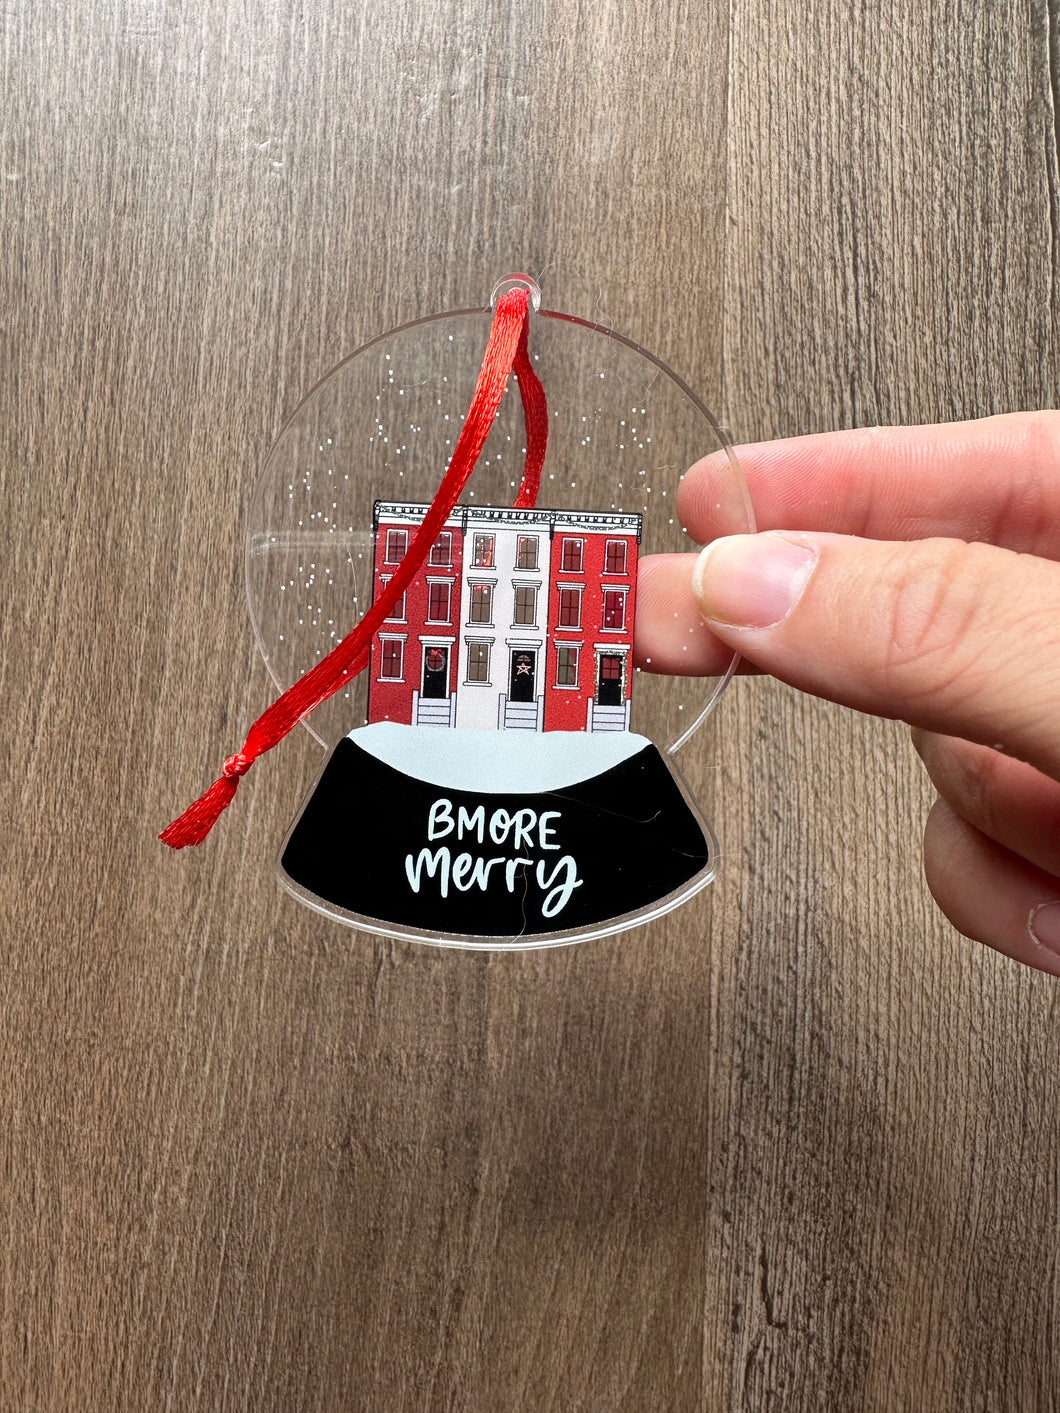 Bmore Merry Maryland Double Sided Snow Globe Ornament